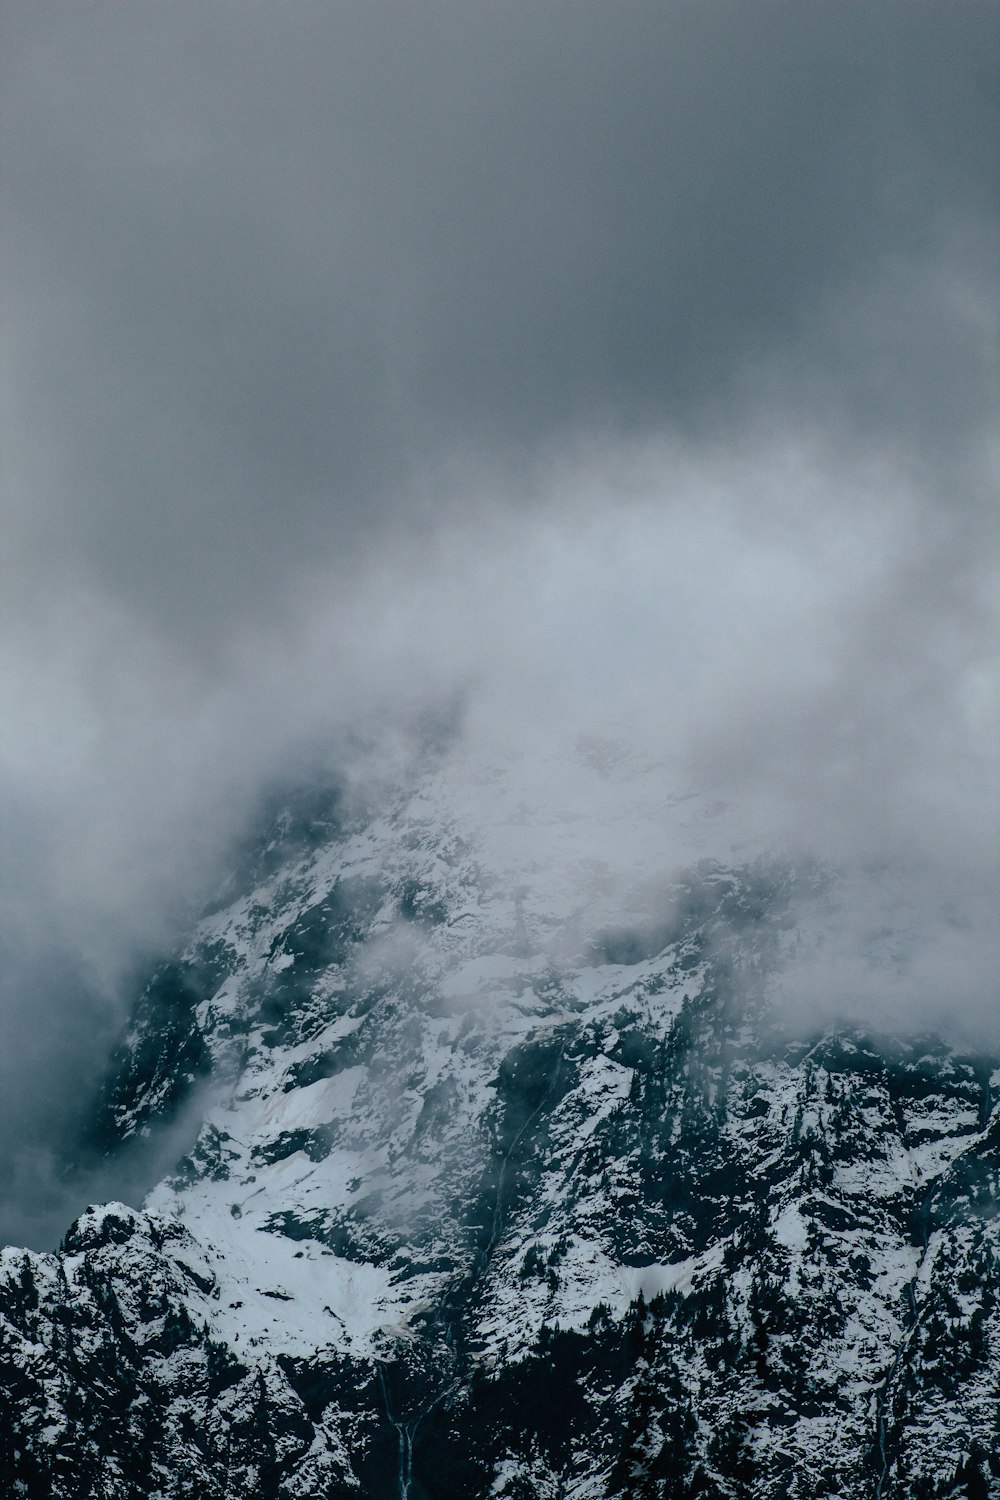 snow covered mountain under cloudy sky